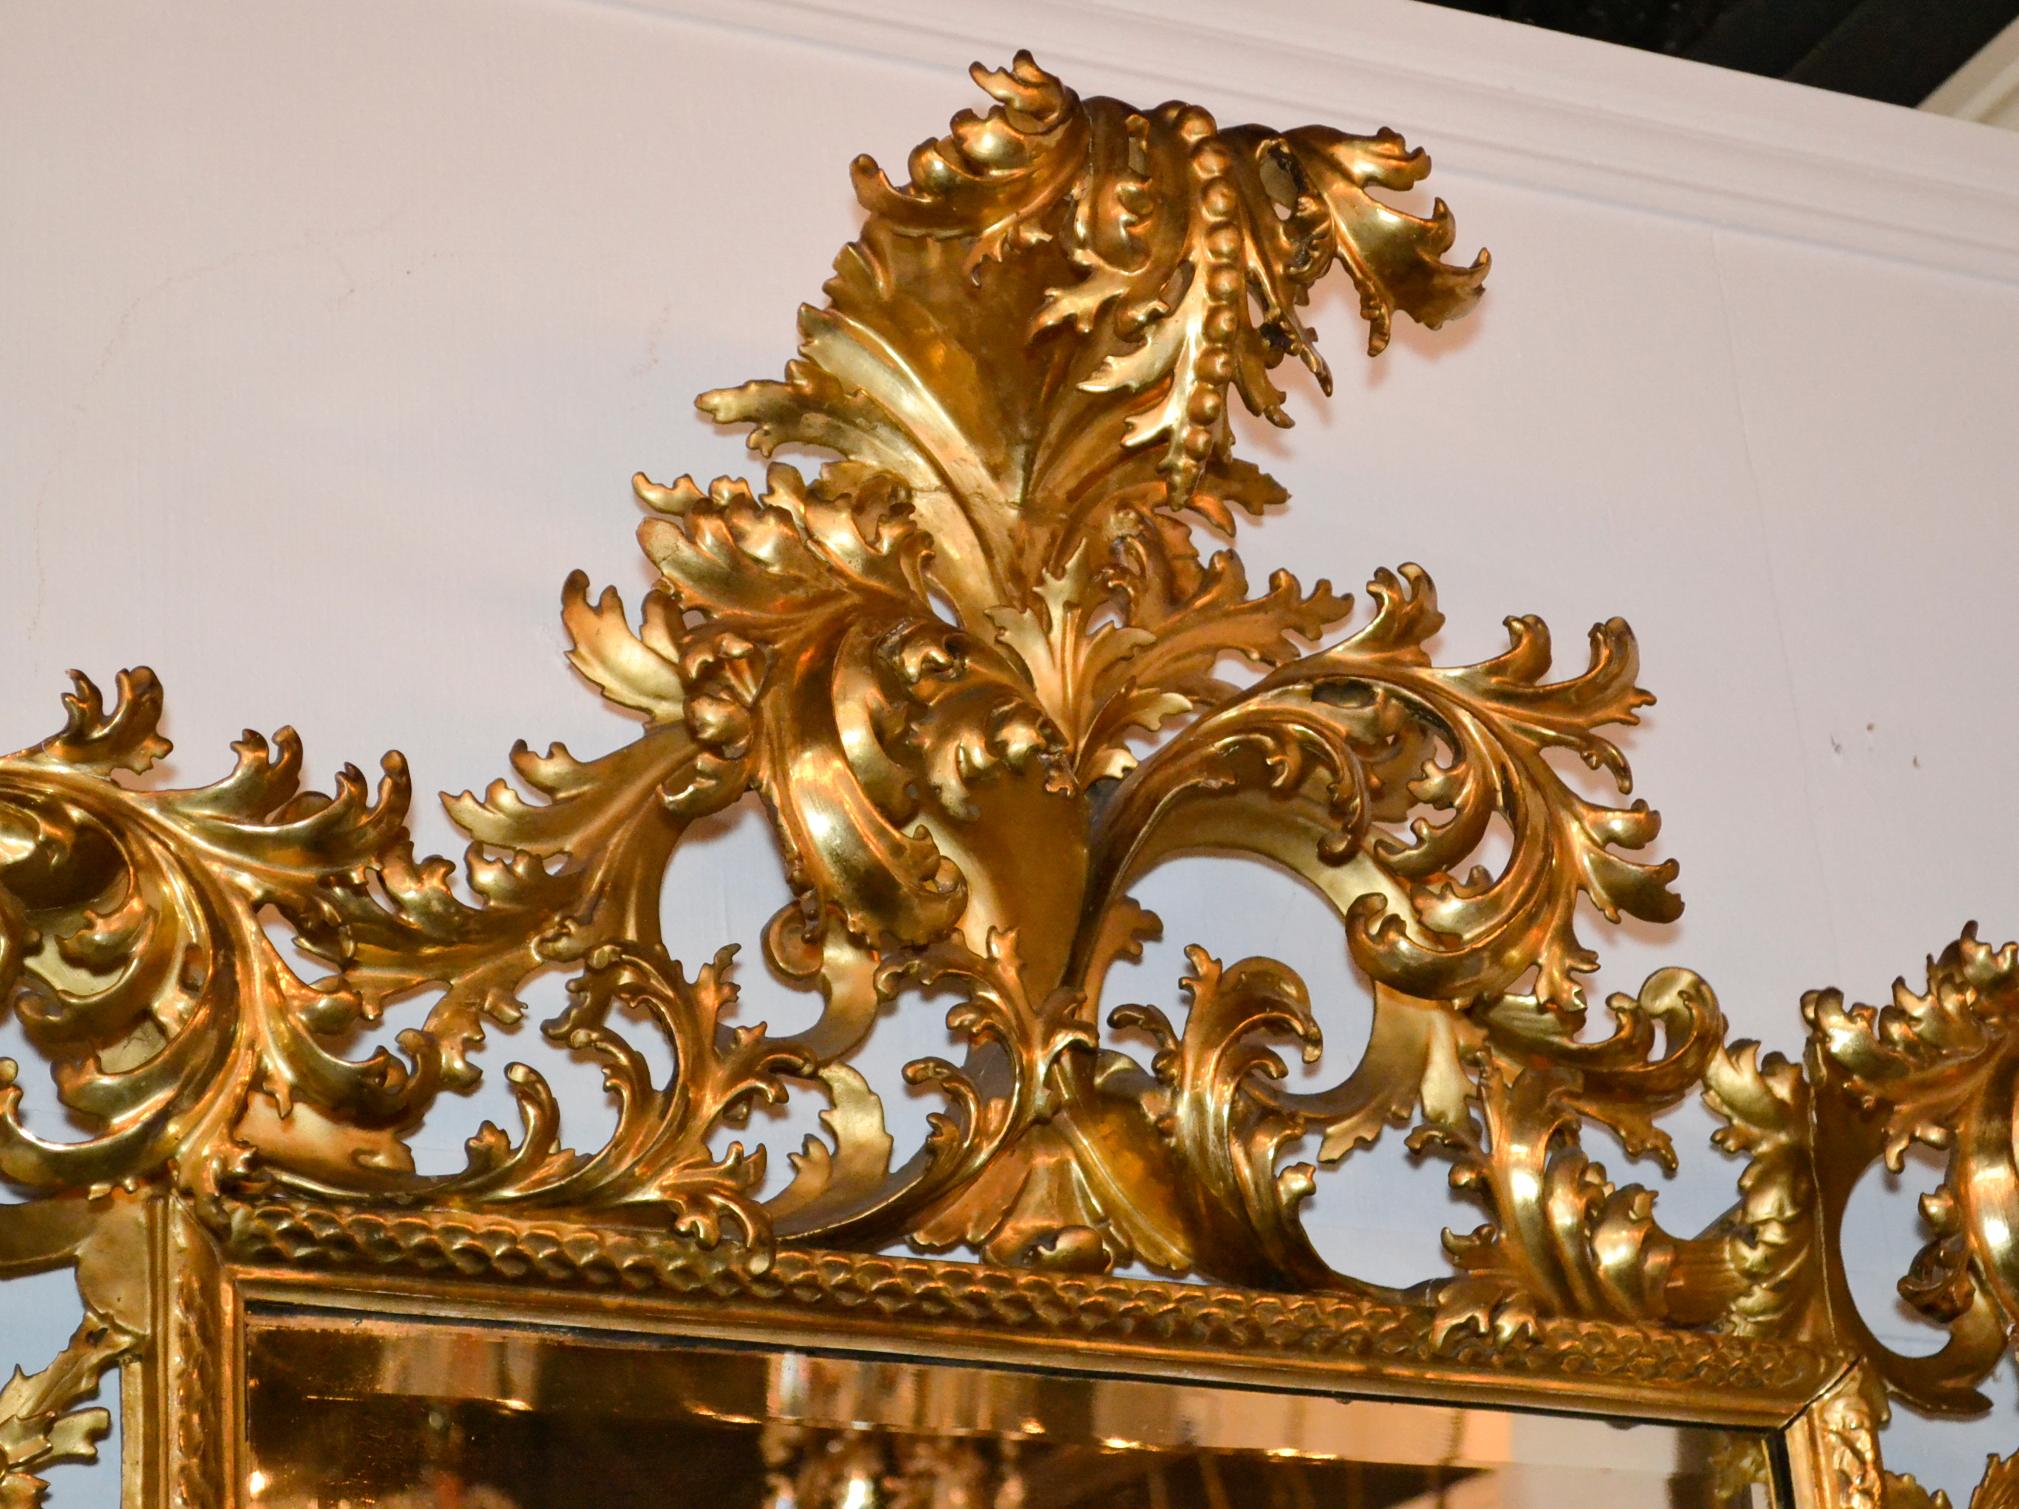 Fabulous 19th century Italian Florentine carved wood and water gilt gold mirror.